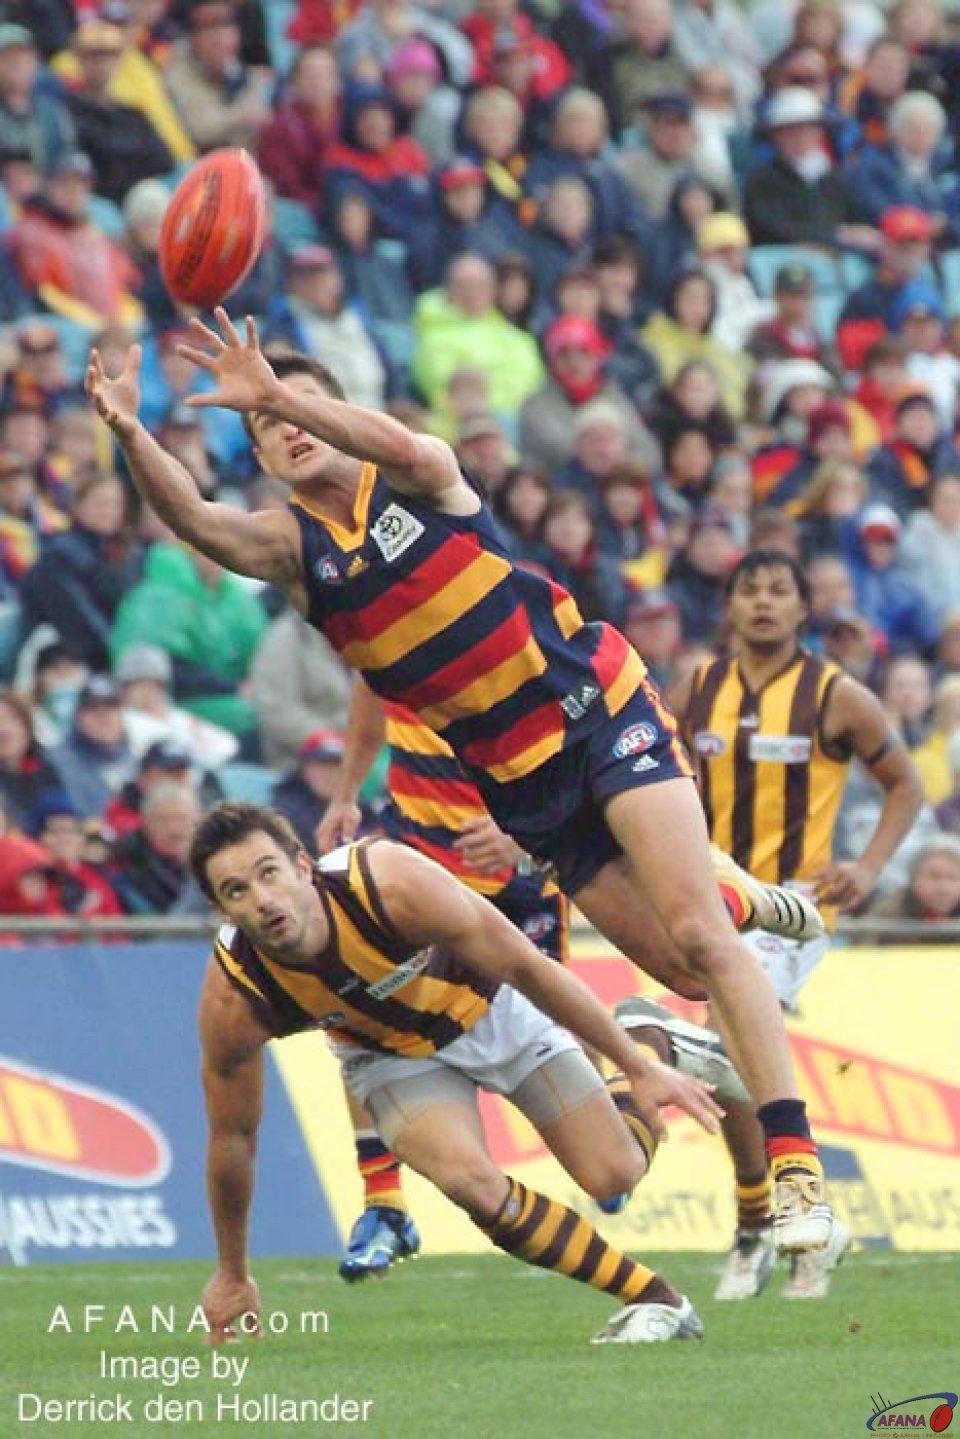 [b]A diving mark of the football by Crows defender Nathan Bassett[/b]